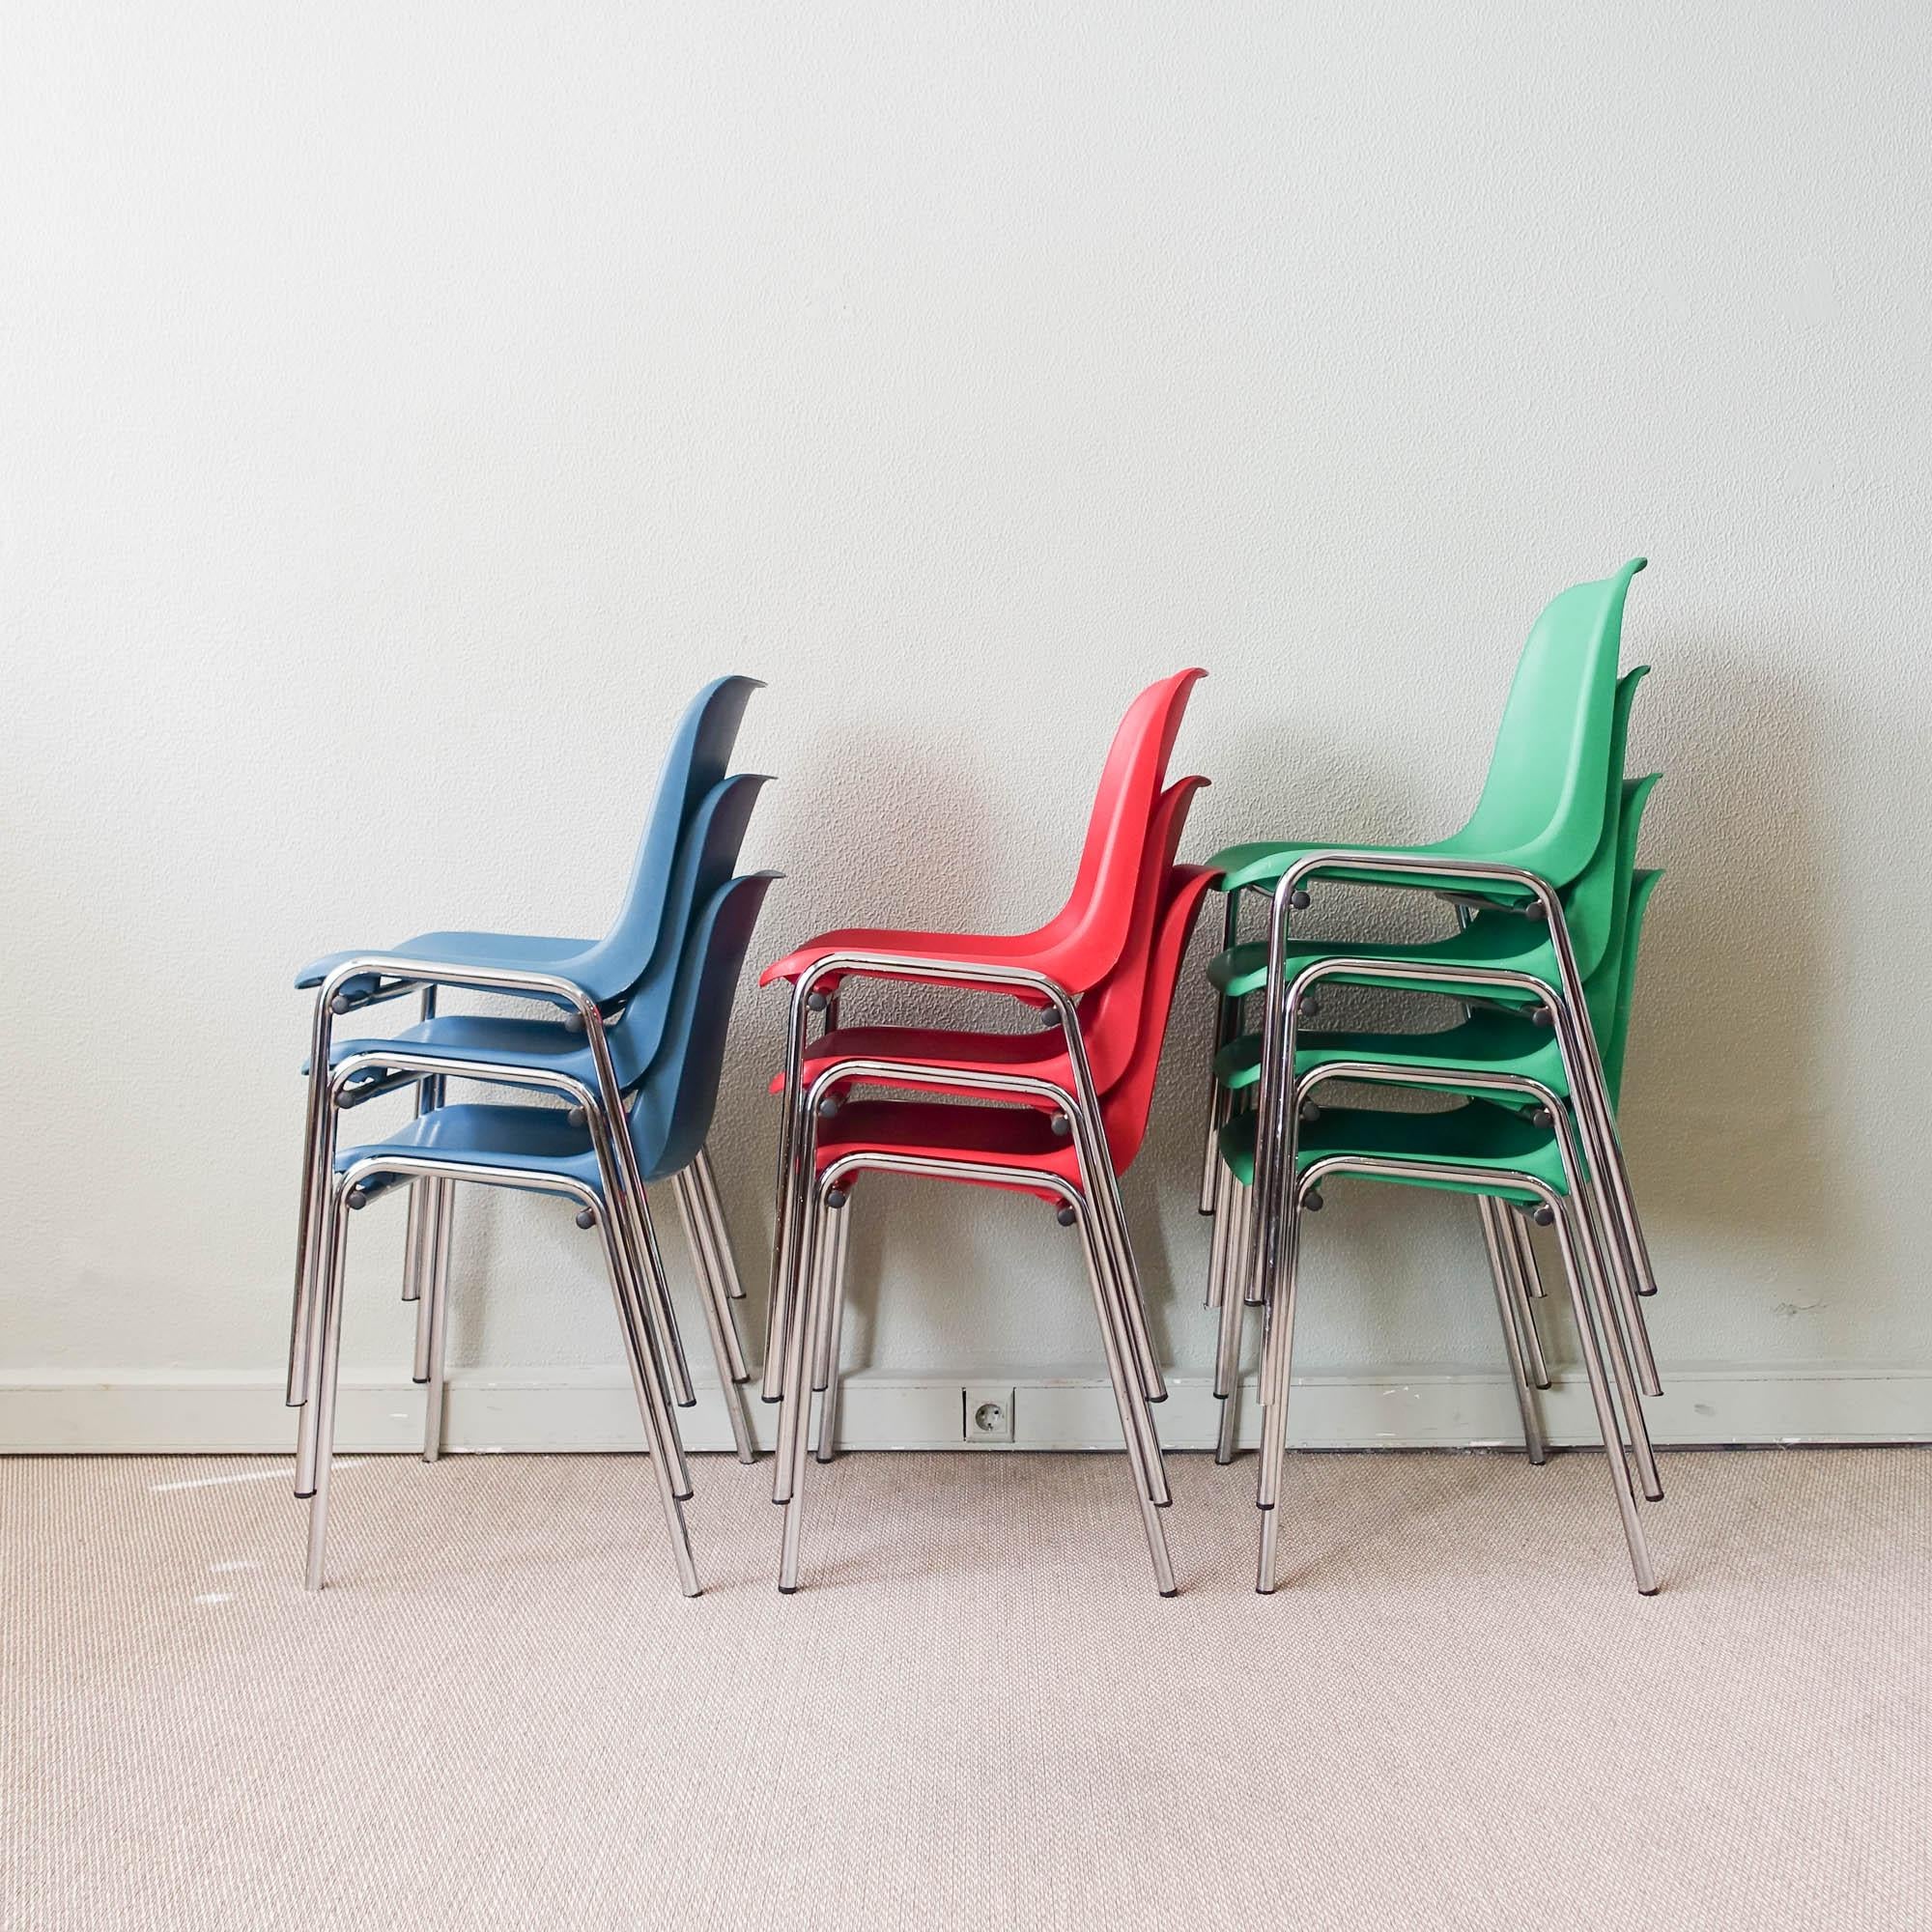 Set of 10 Multicolored Stackable Chairs in the Style of Helmut Starke, 1970s For Sale 13